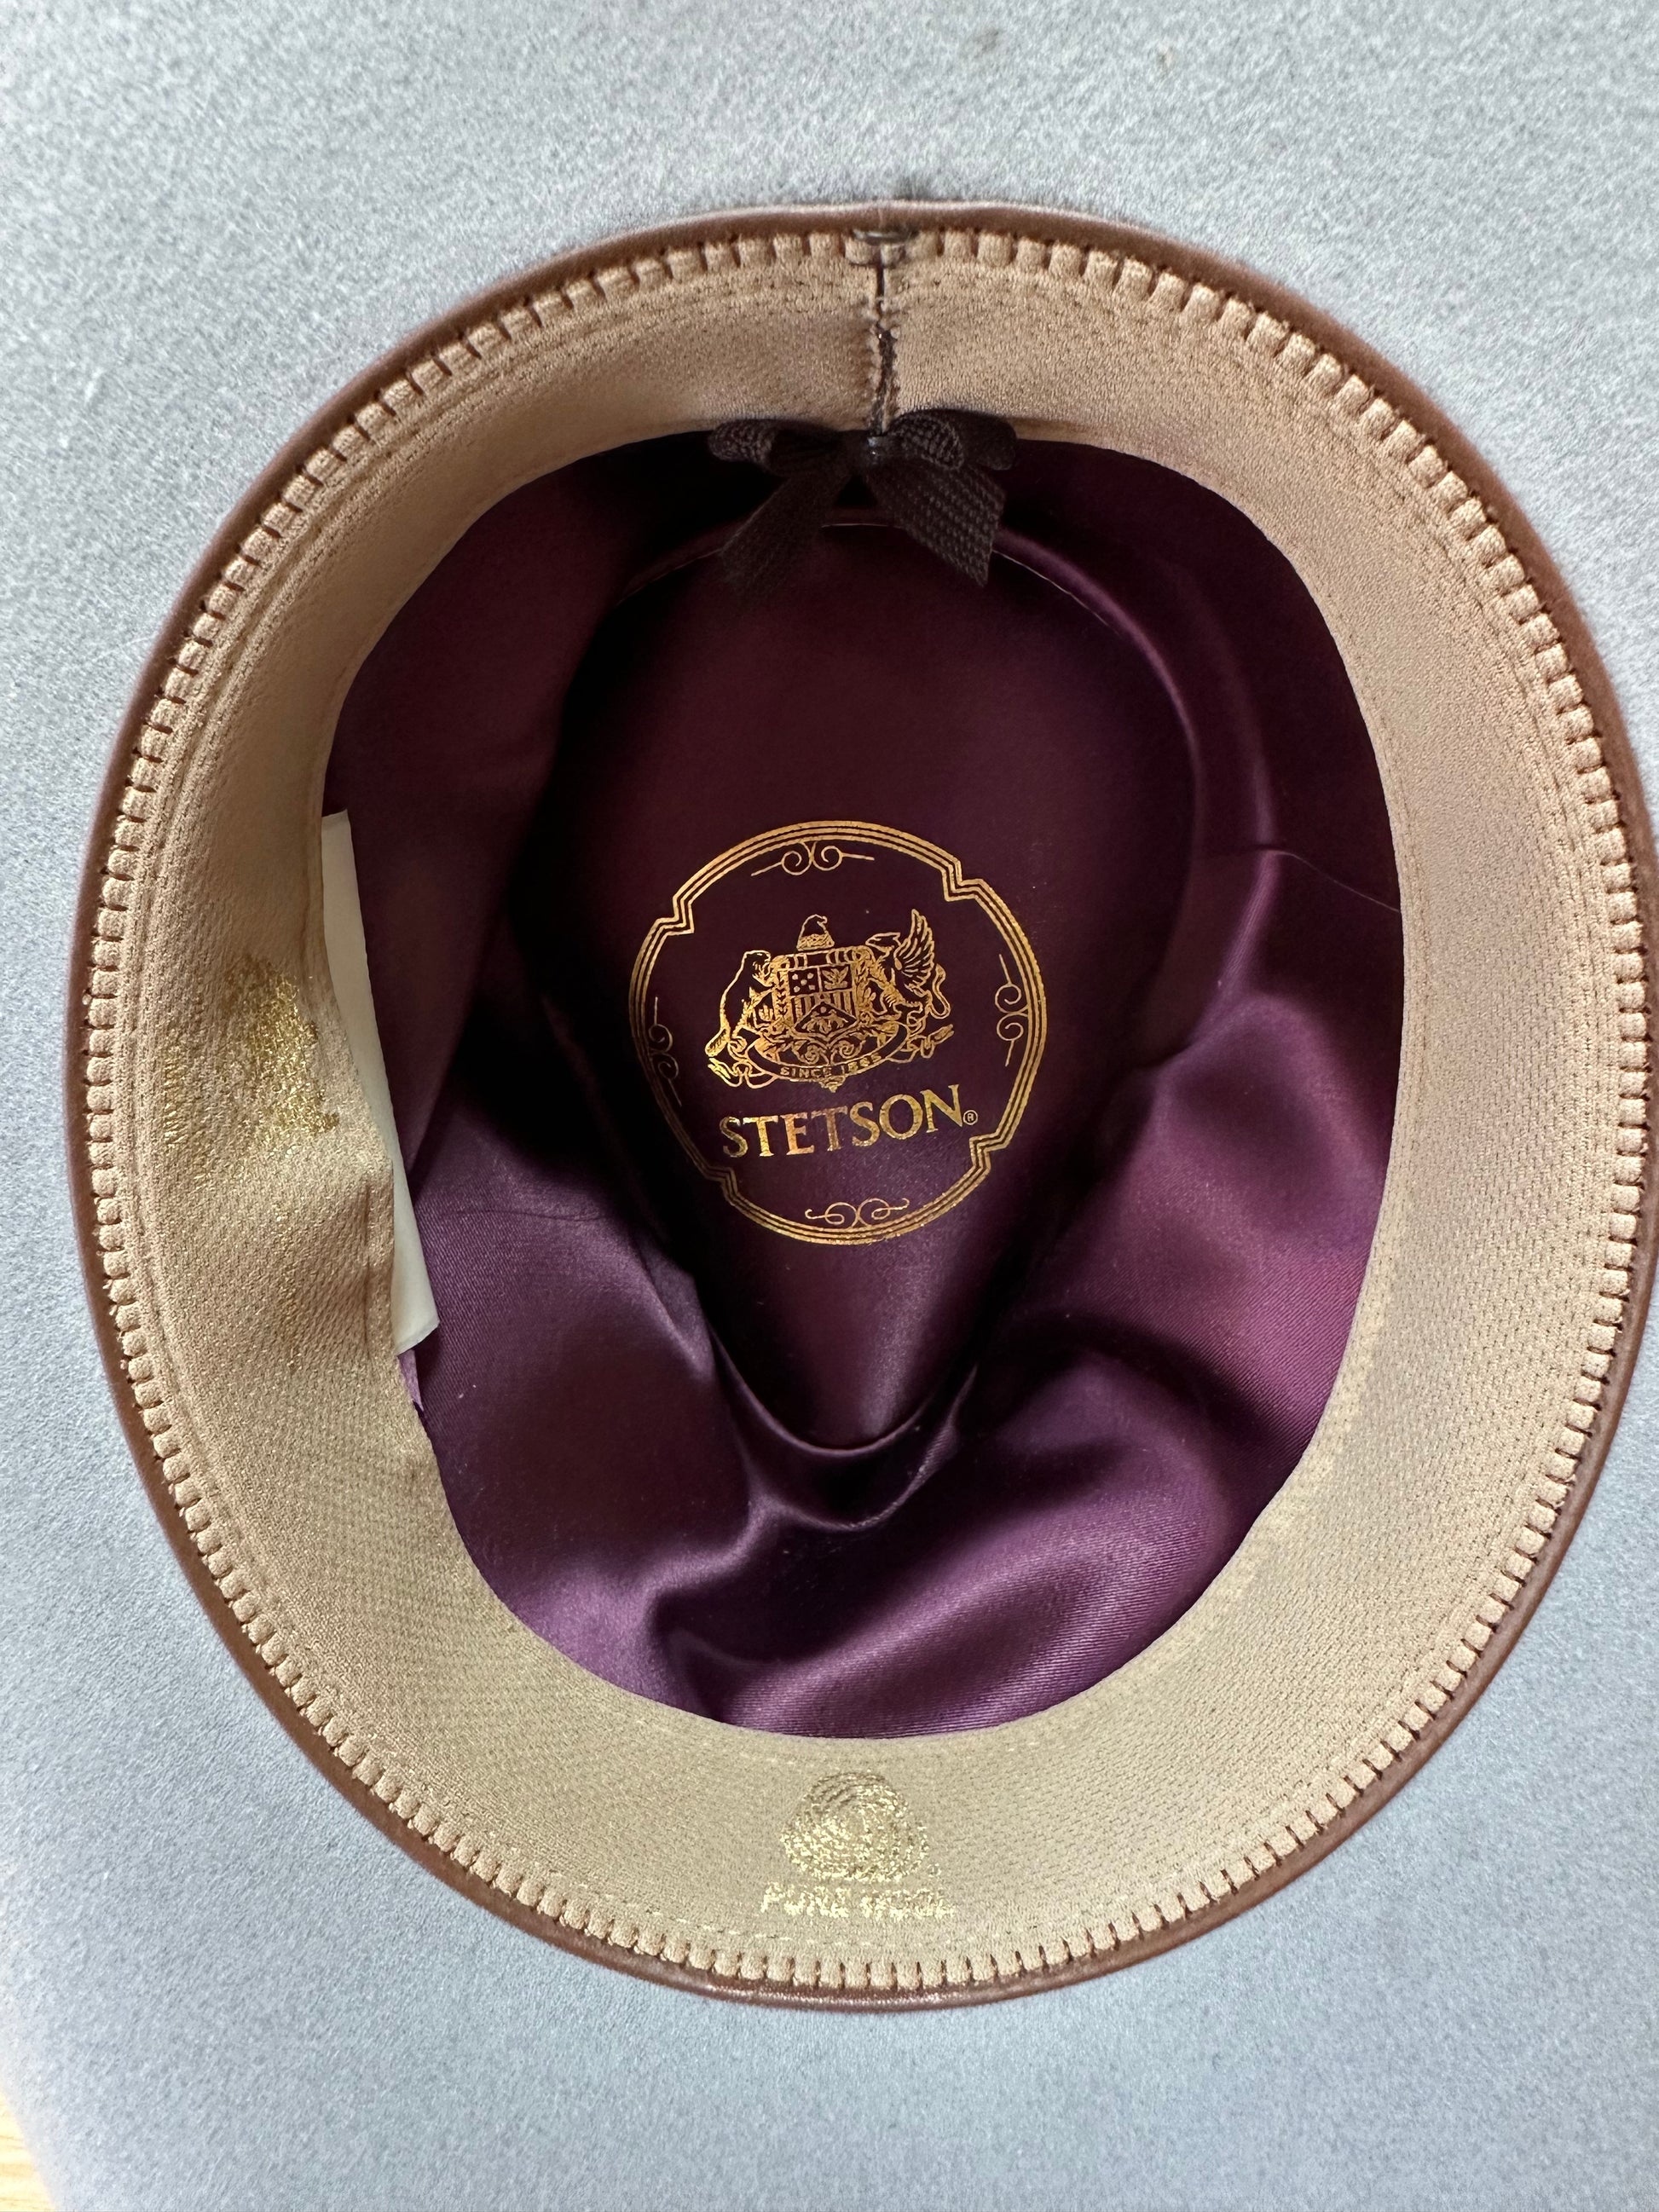 Satin Hat Liner for Fedora and Cowboy Hats Made in USA 